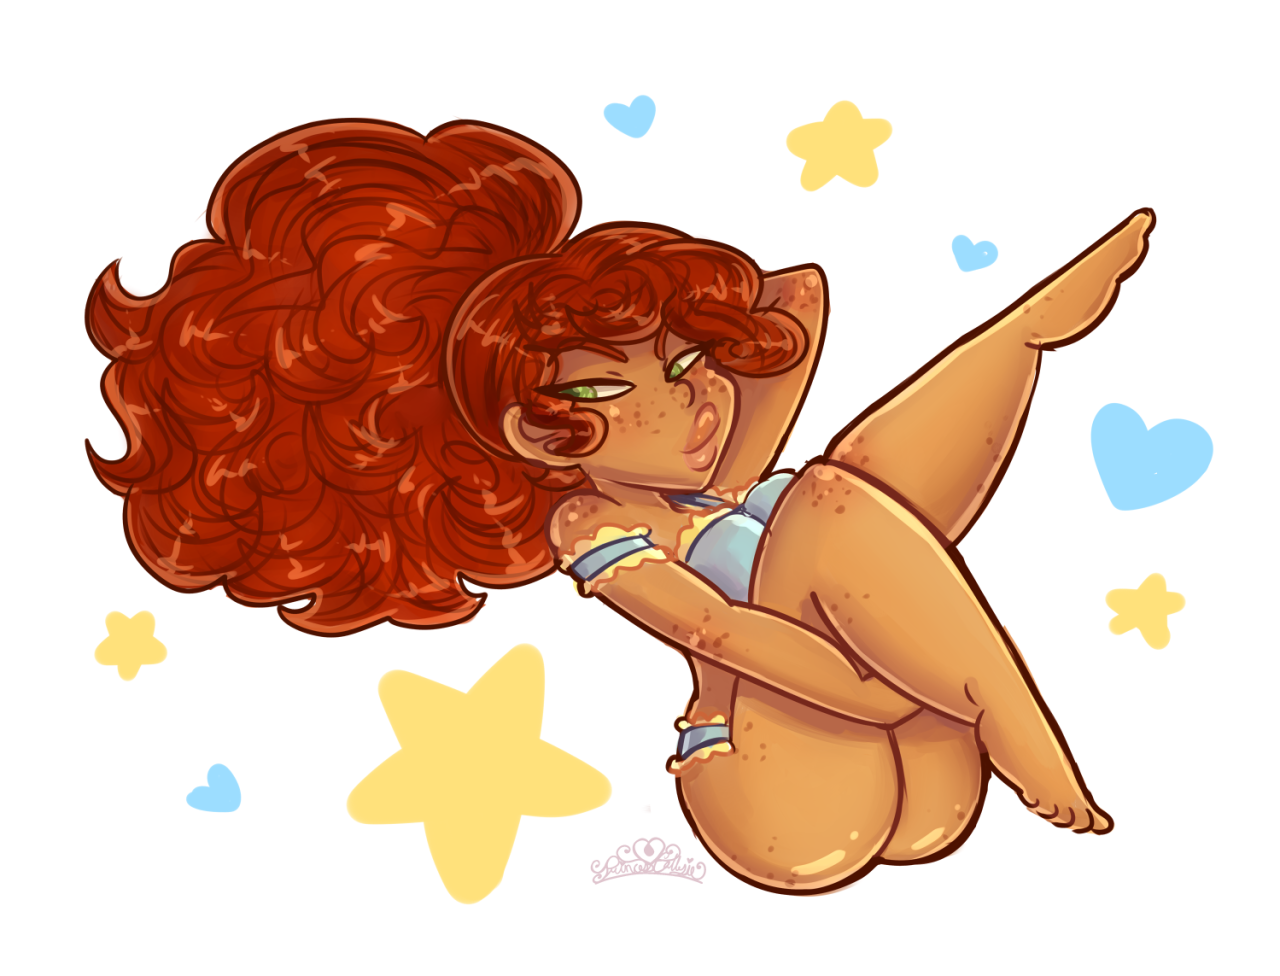 princesscallyie:   pastelmoonbitch said: Could you draw a pinup style of Princess?